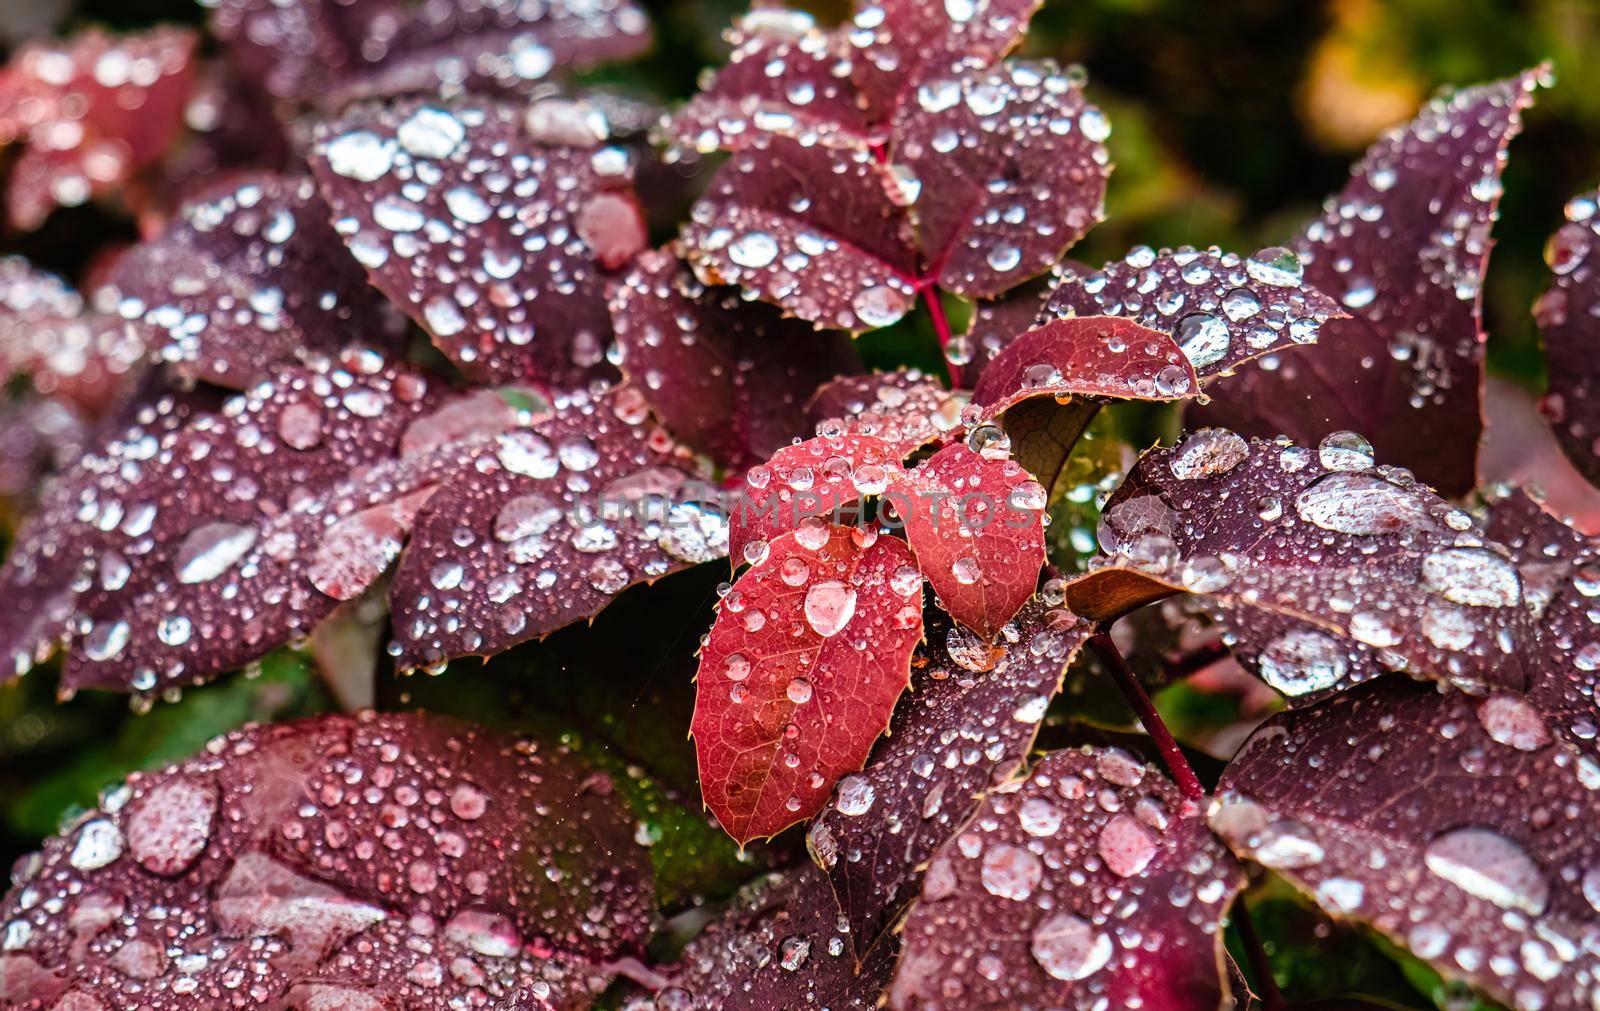 Crimson leaves covered with drops of water on autumn season.